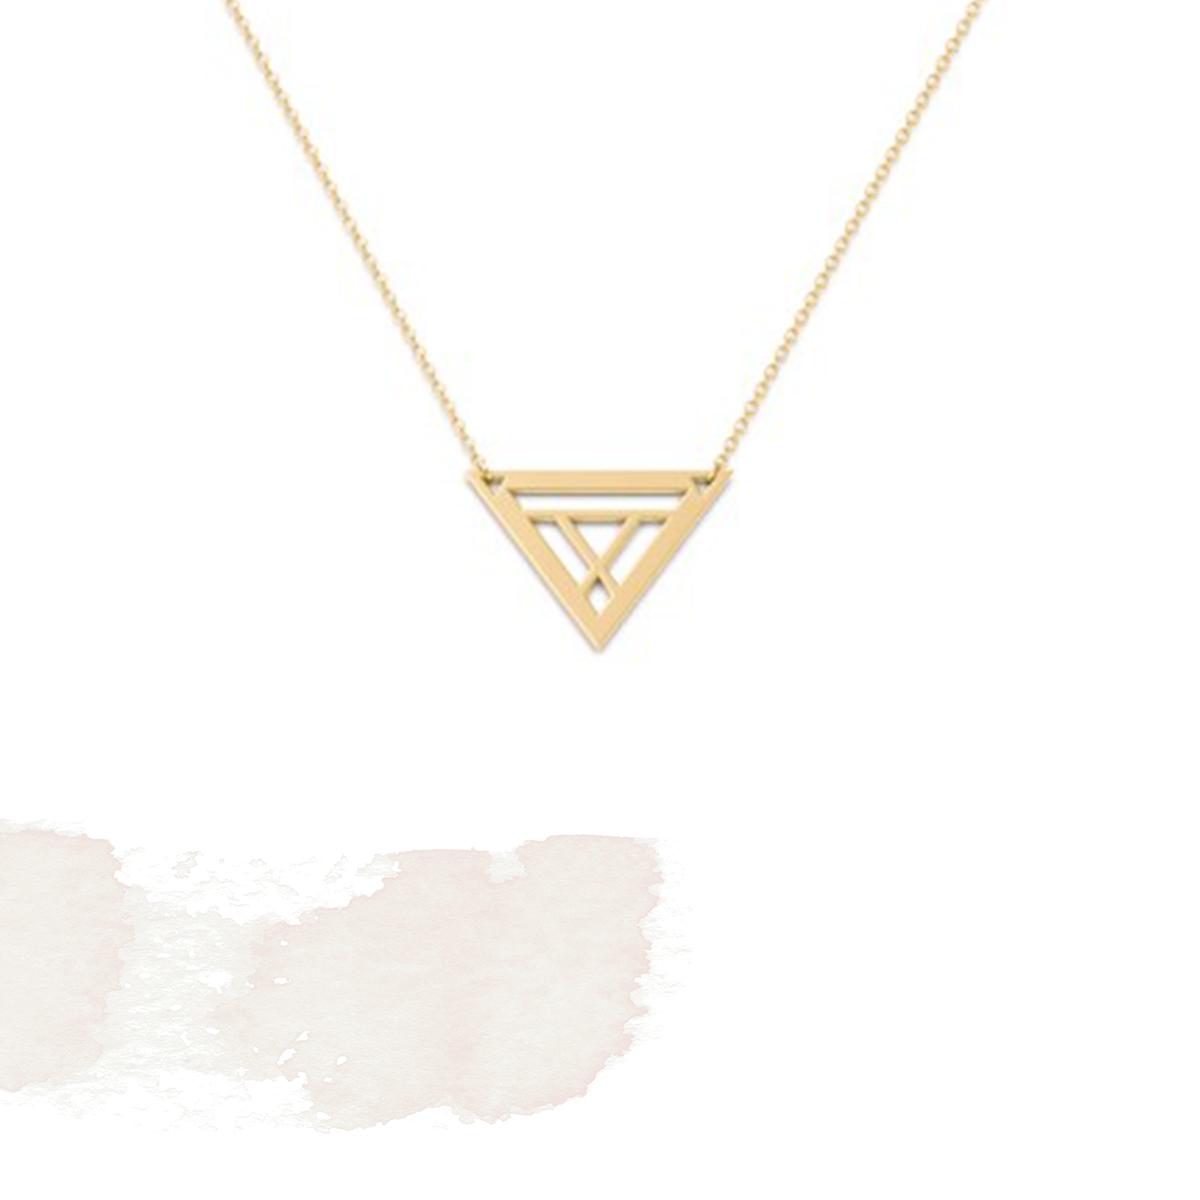 10K Yellow Gold Triangle Necklace